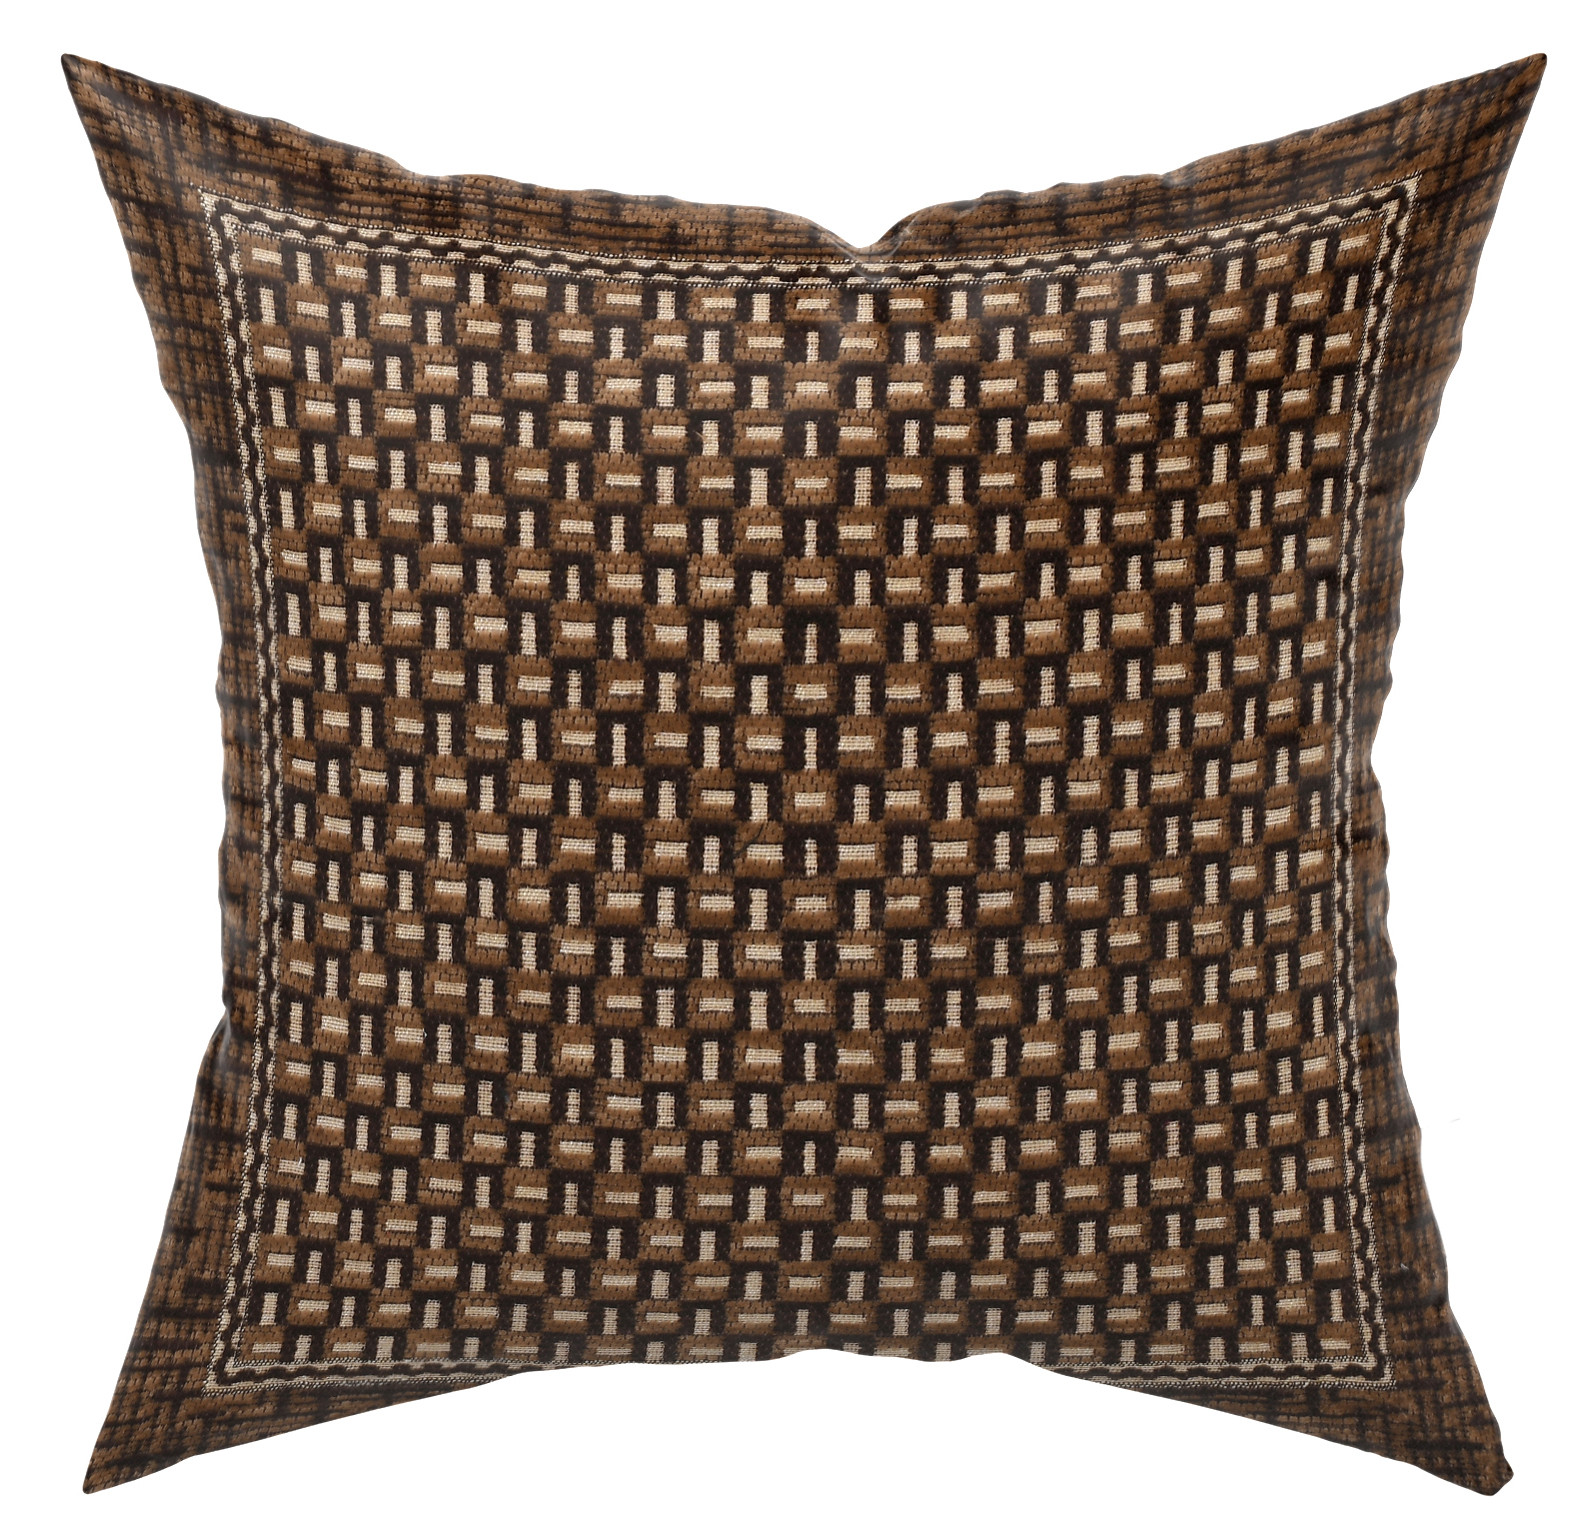 Kuber Industries Velvet Check Design Soft Decorative Square Throw Pillow Cover, Cushion Covers, Pillow Case For Sofa Couch Bed Chair 16x16 Inch-(Brown)